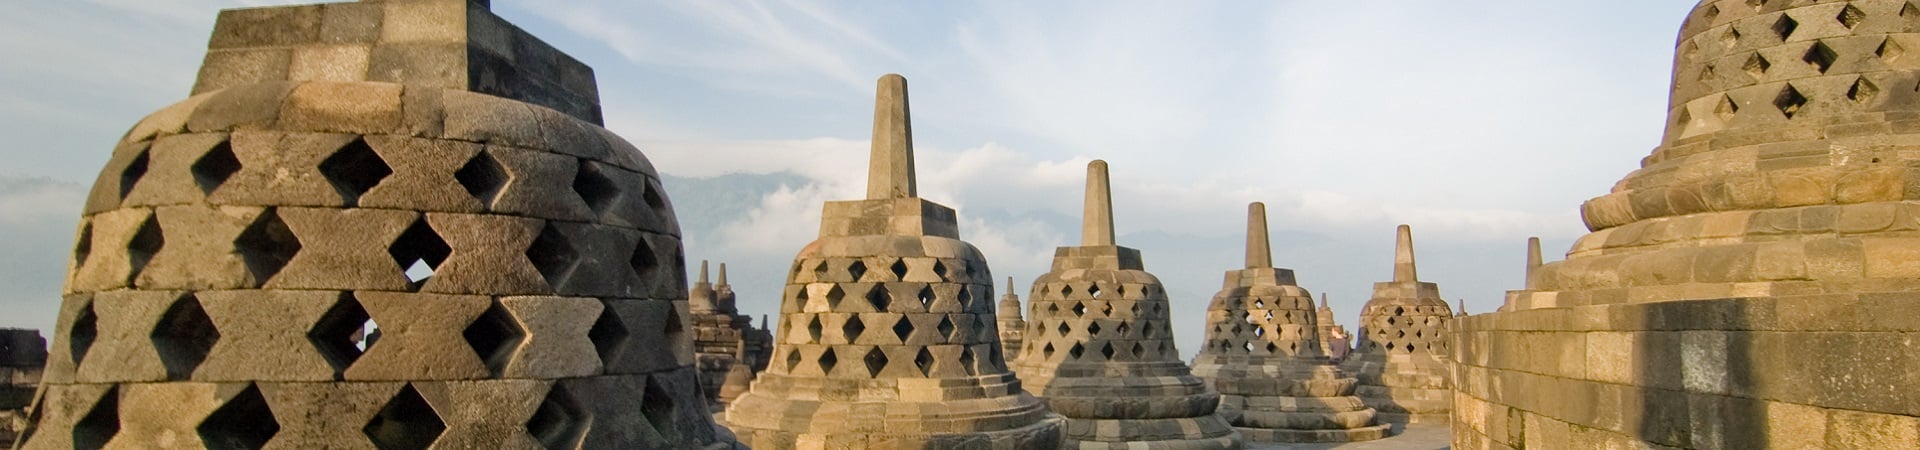 Image of Shrines and Cupboards - Cooking at Borobudur